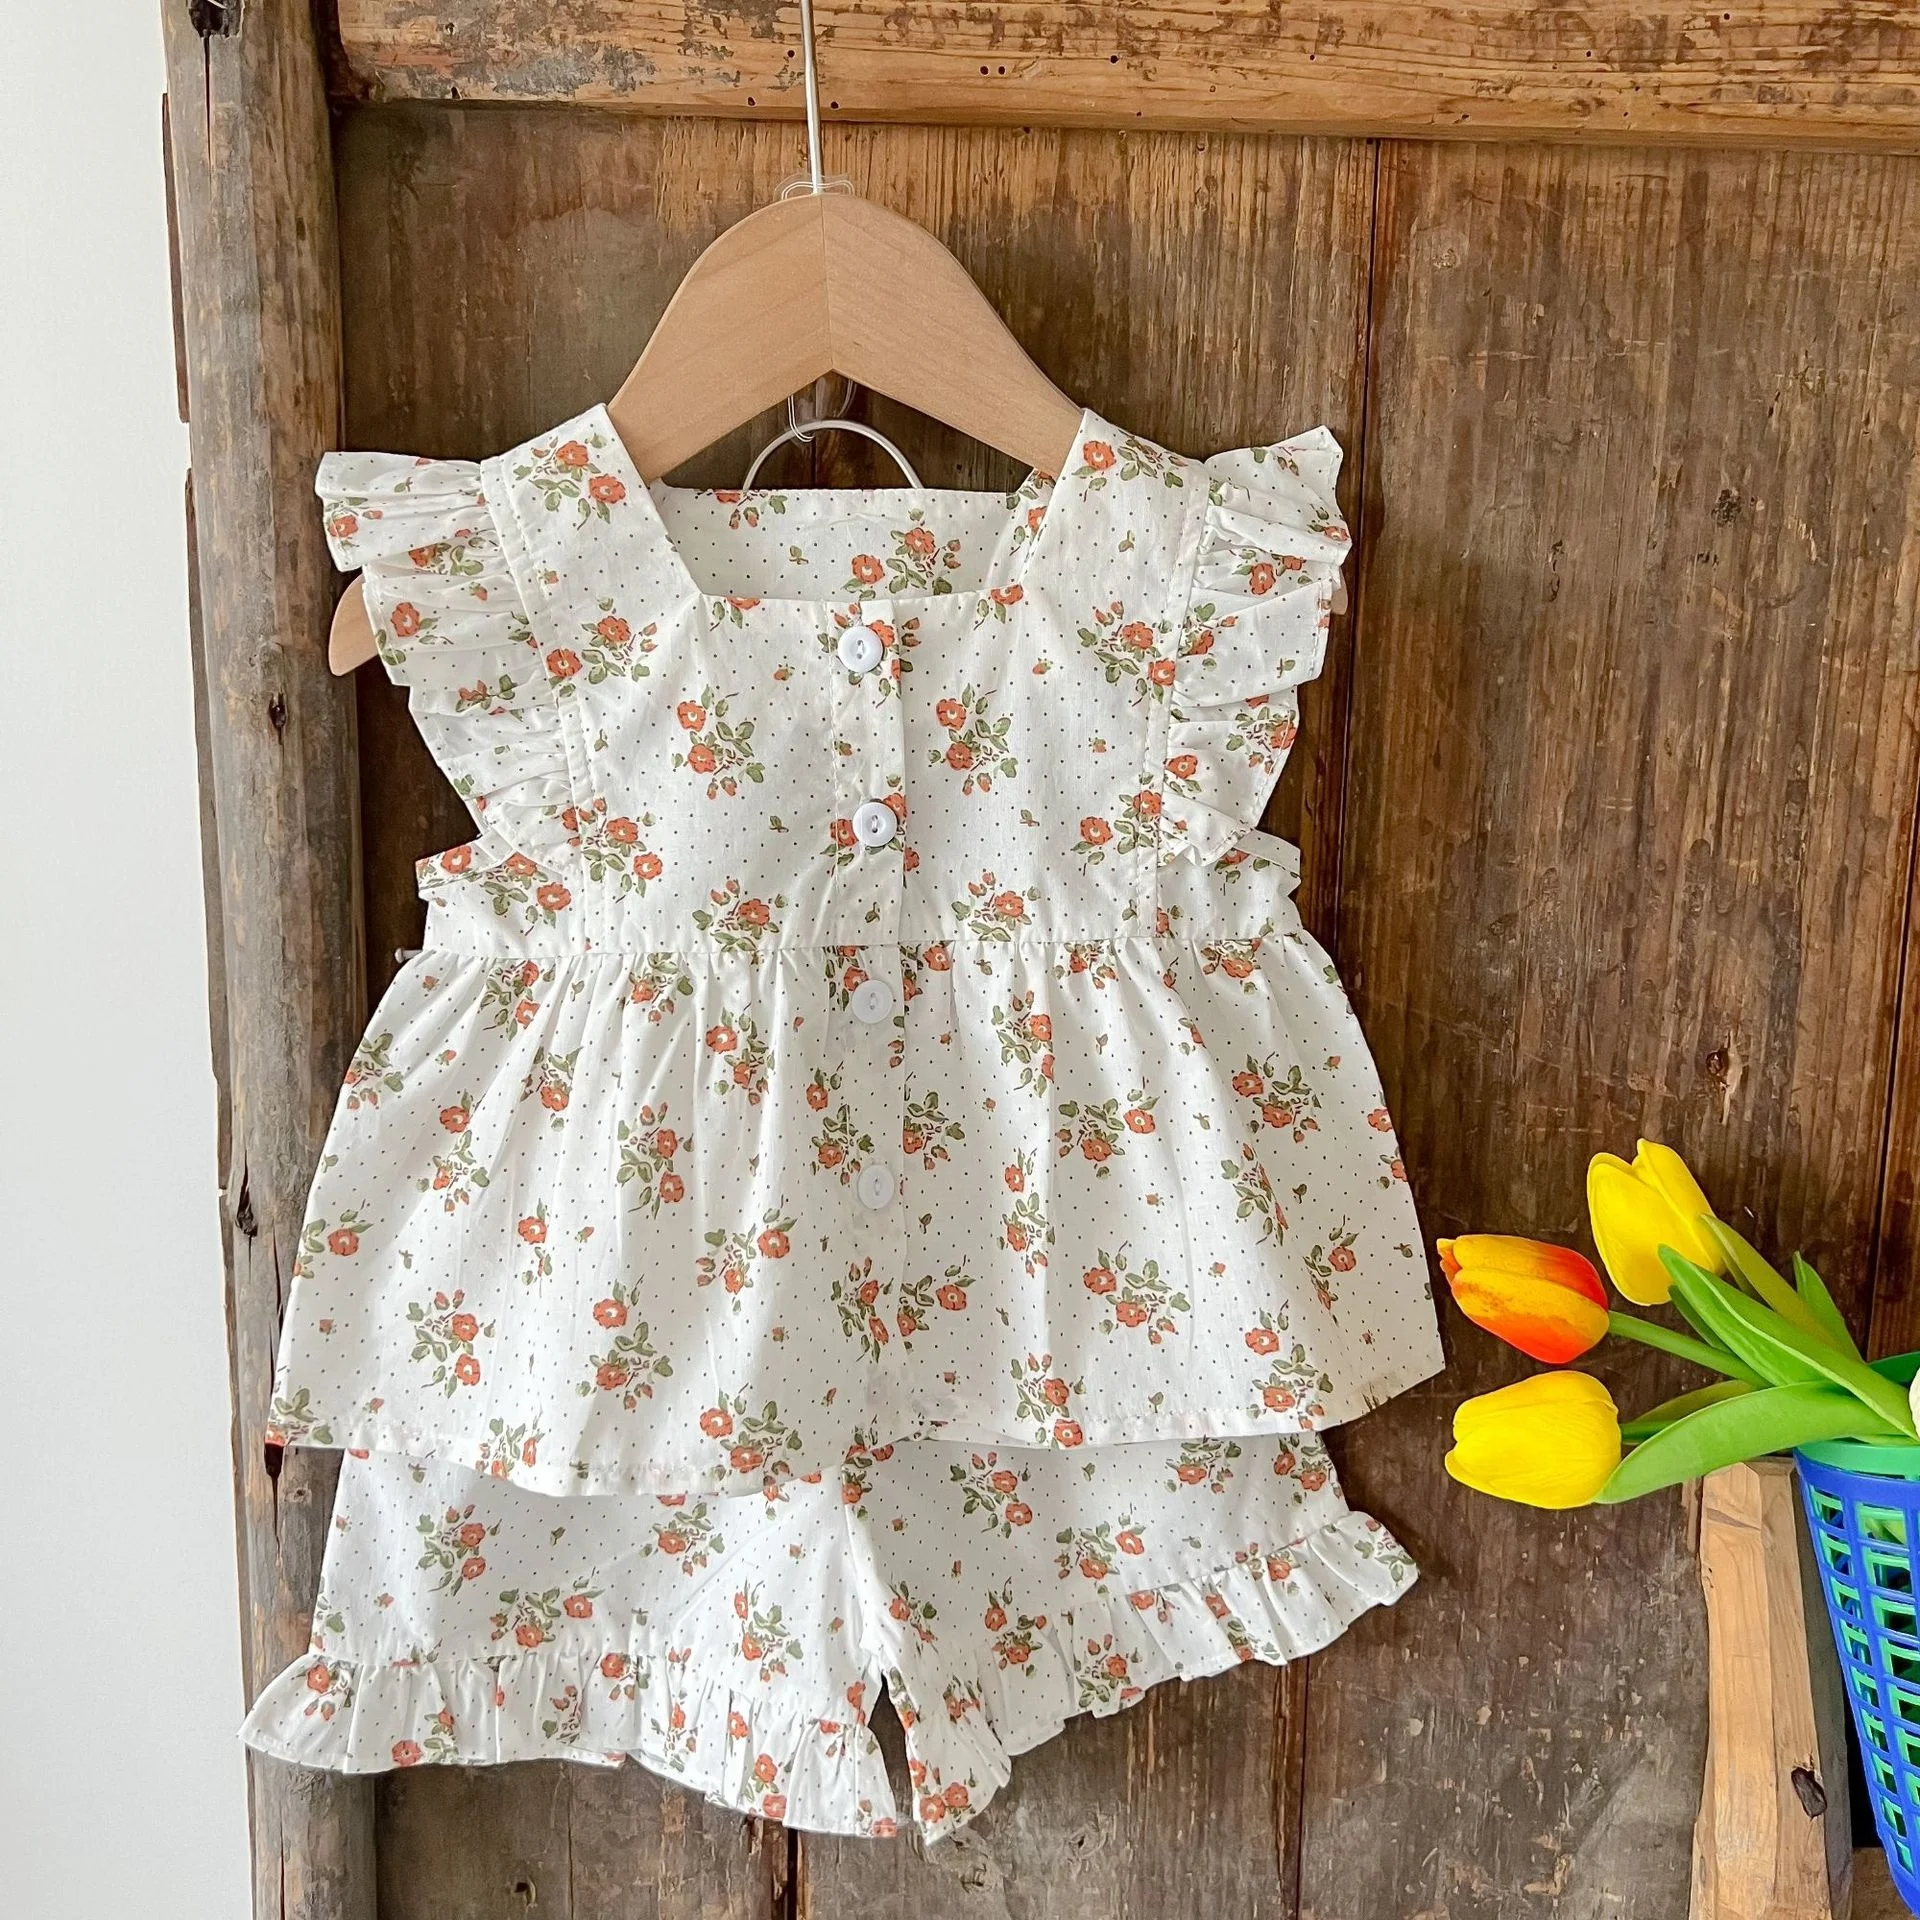 

Baby Girls Lovely Ruffled Summer Sleeves Floral Tops + Bloomer Shorts Pant Toddler 100% Organic Cotton Outfit Sets 0-36 Months